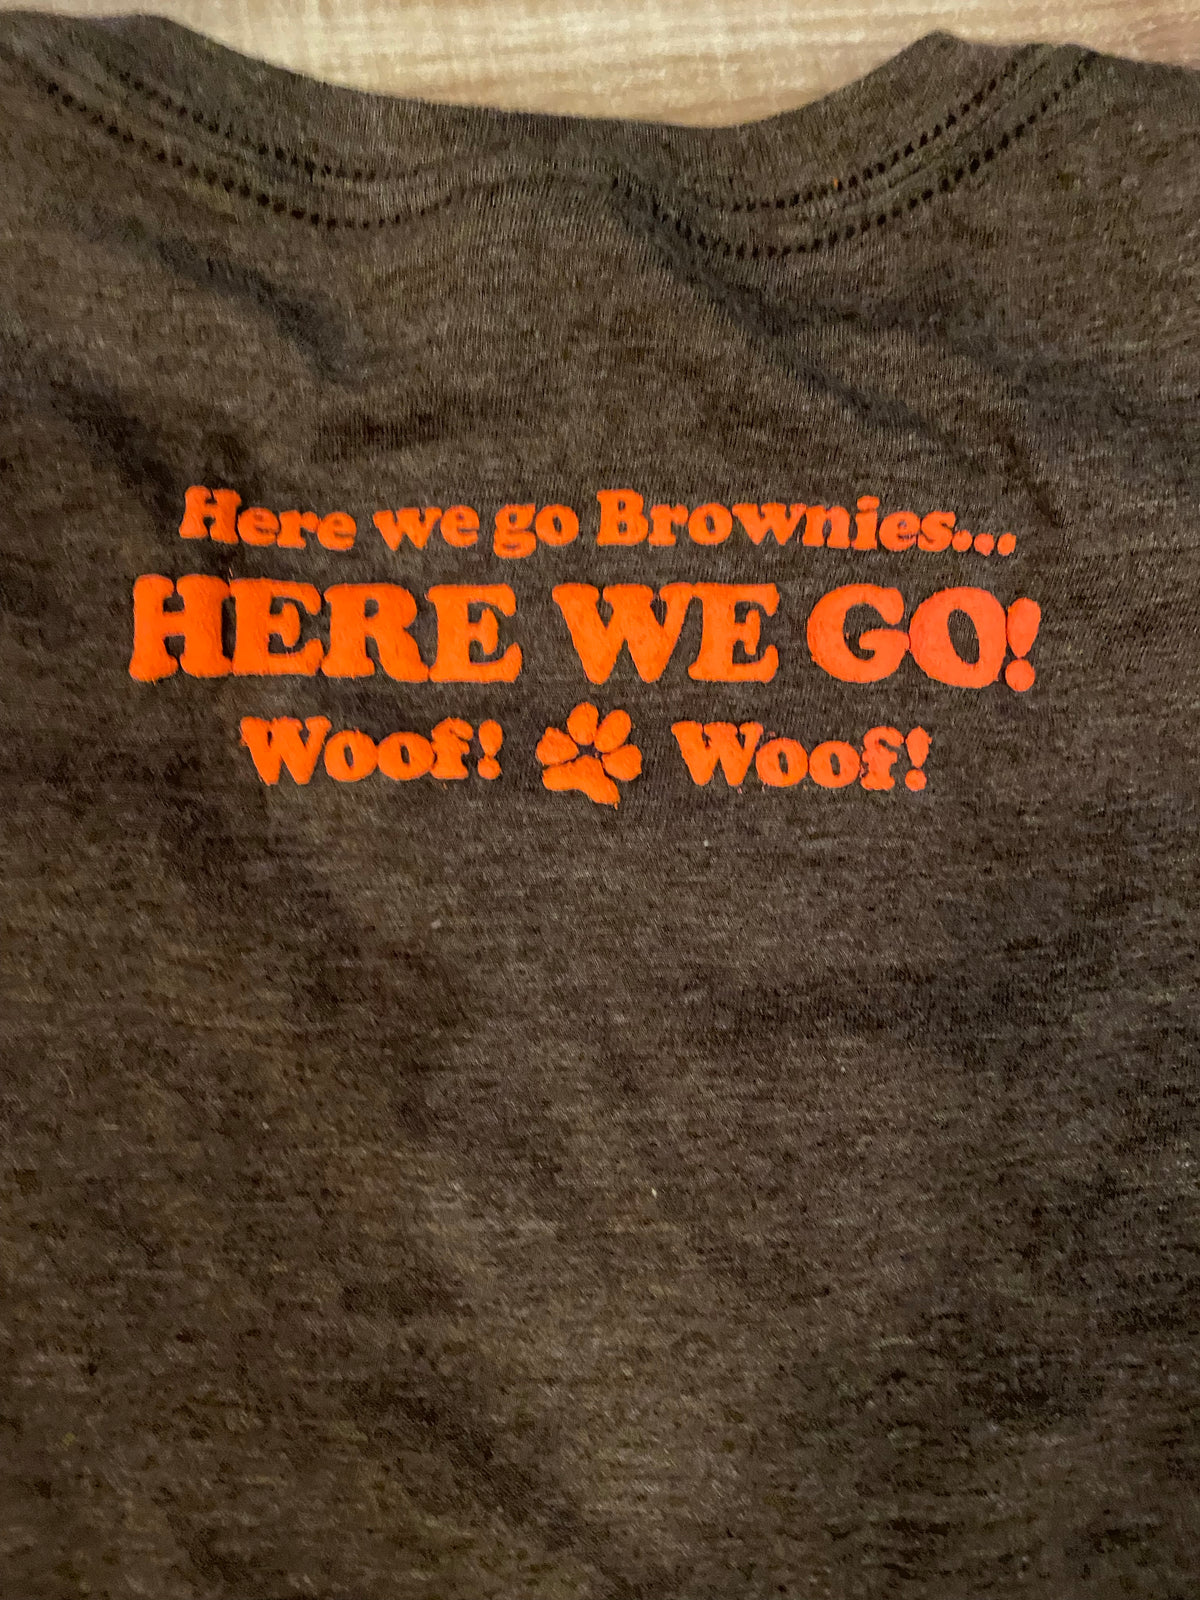 Born and Bred Browns fan Short Sleeve tee in Brown